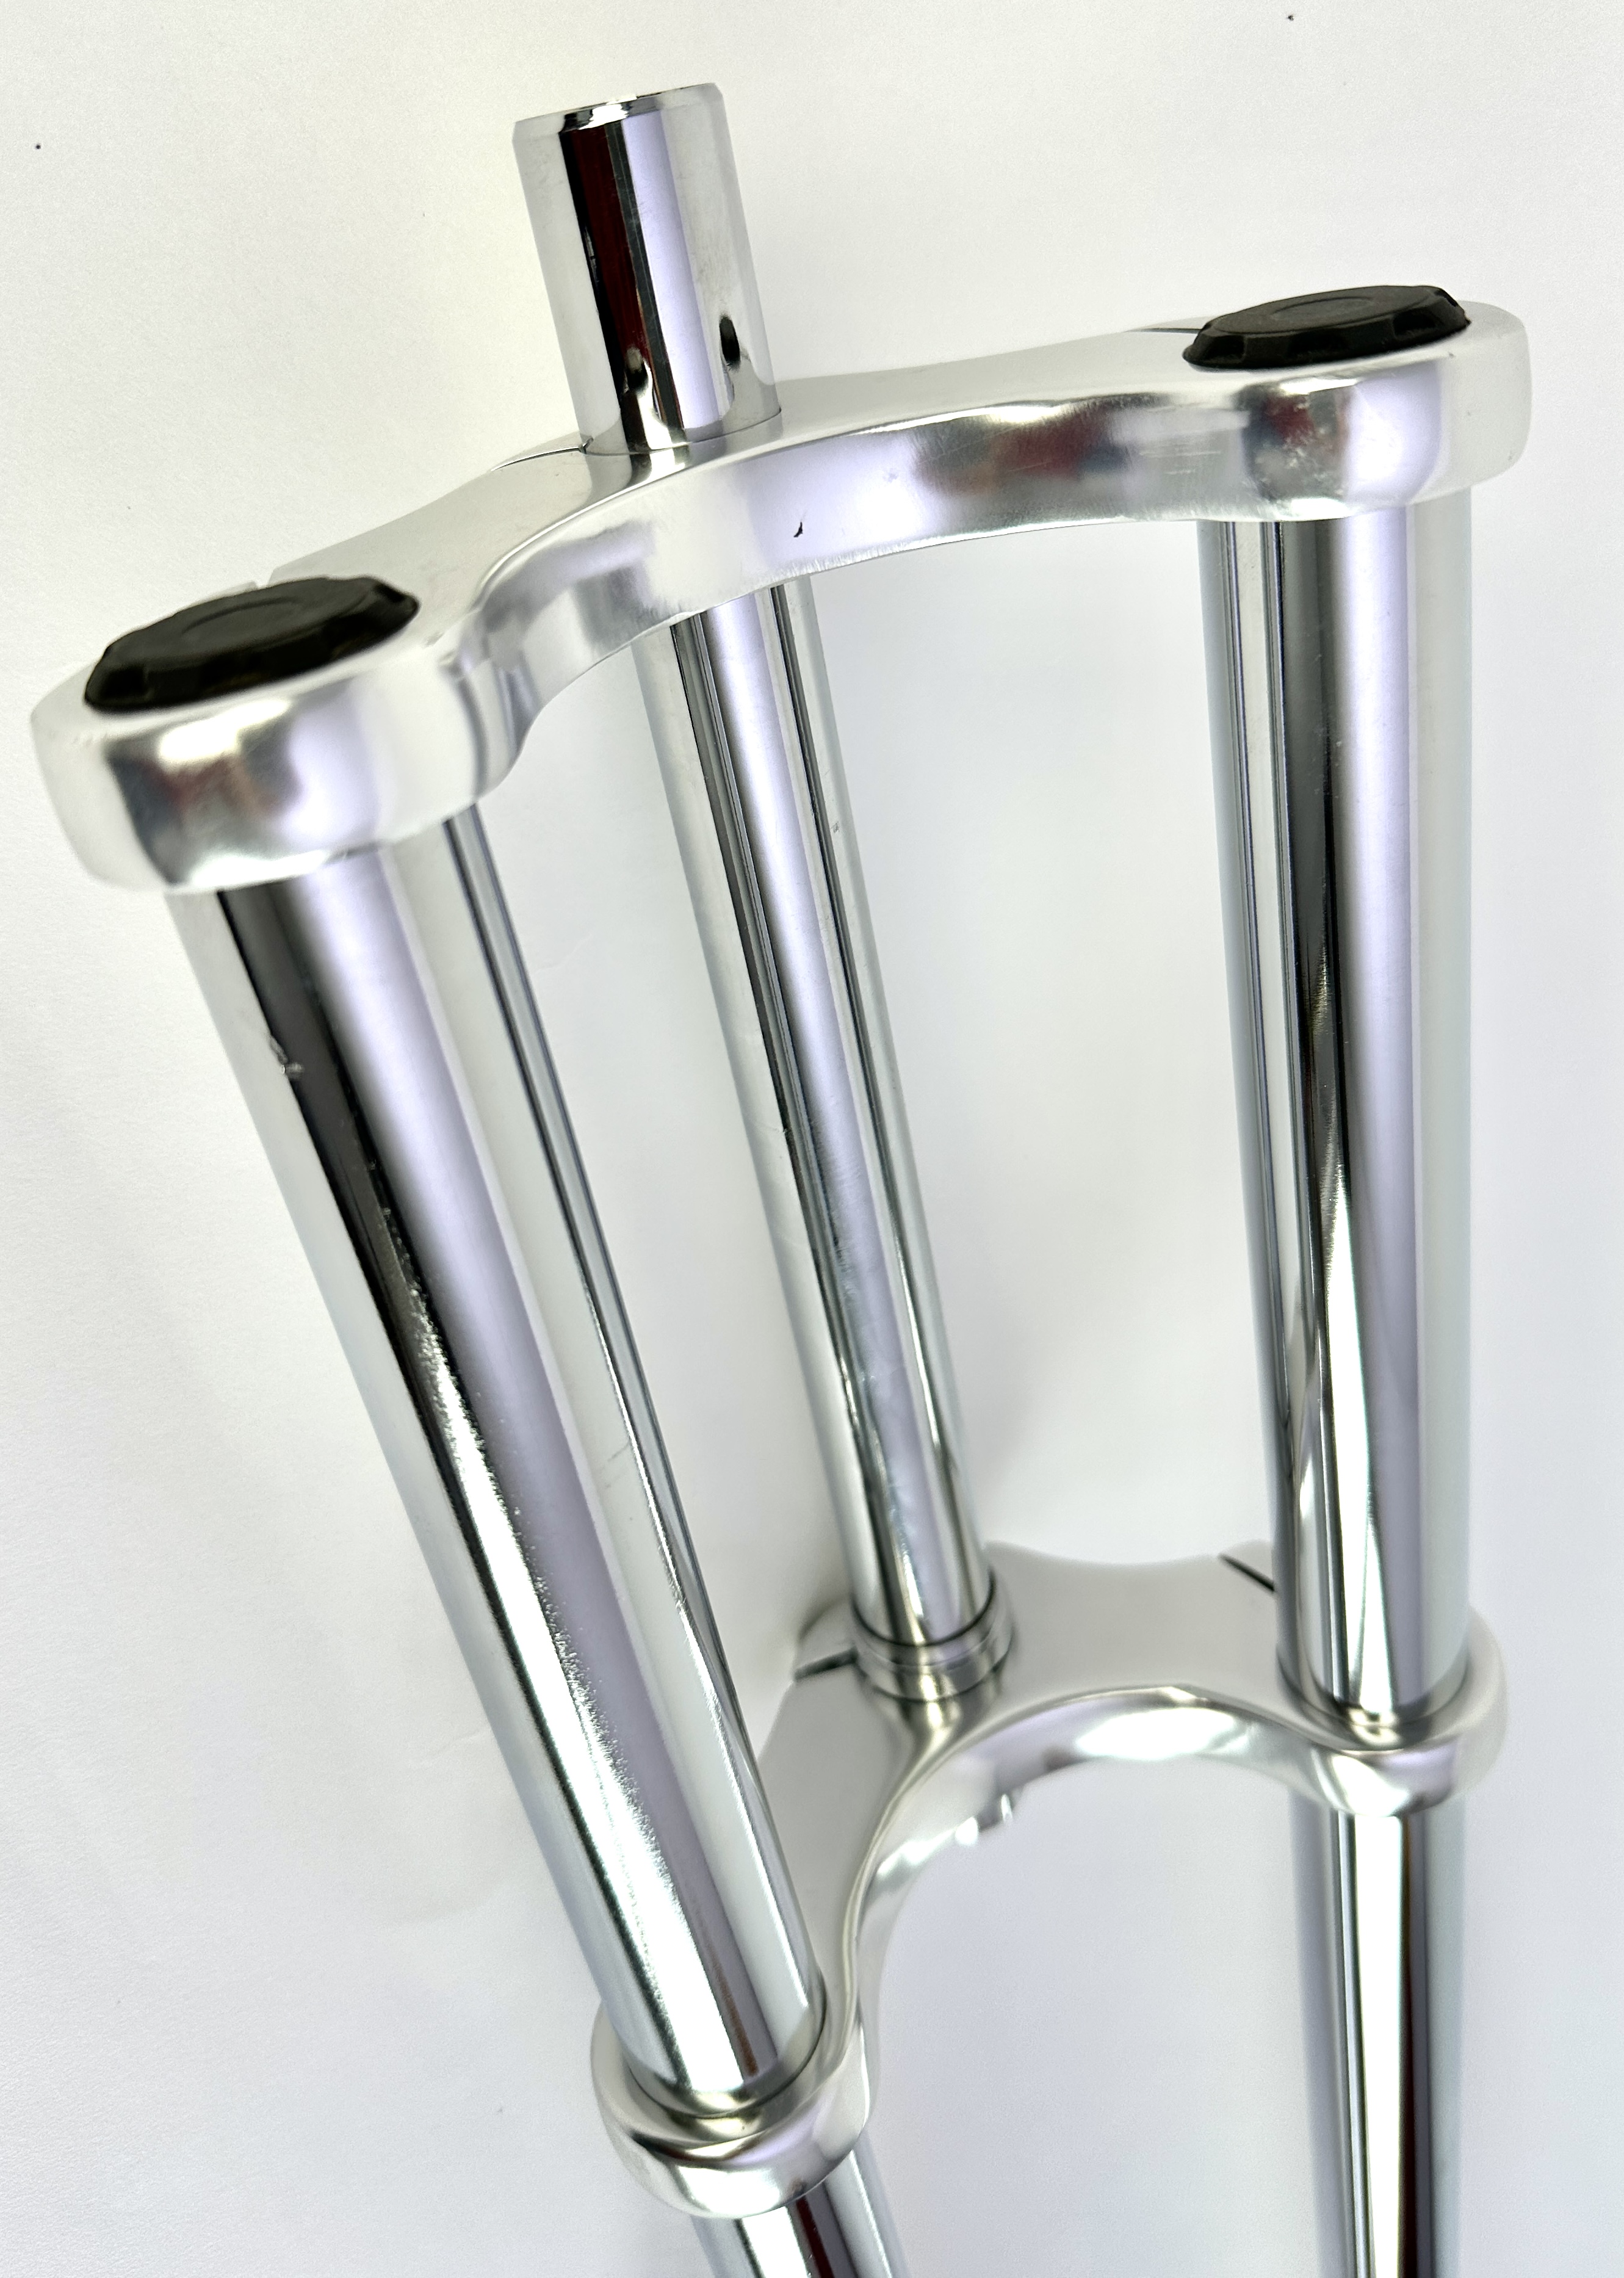 6-Double crown fork 800 mm chrome plated 1 inch shaft